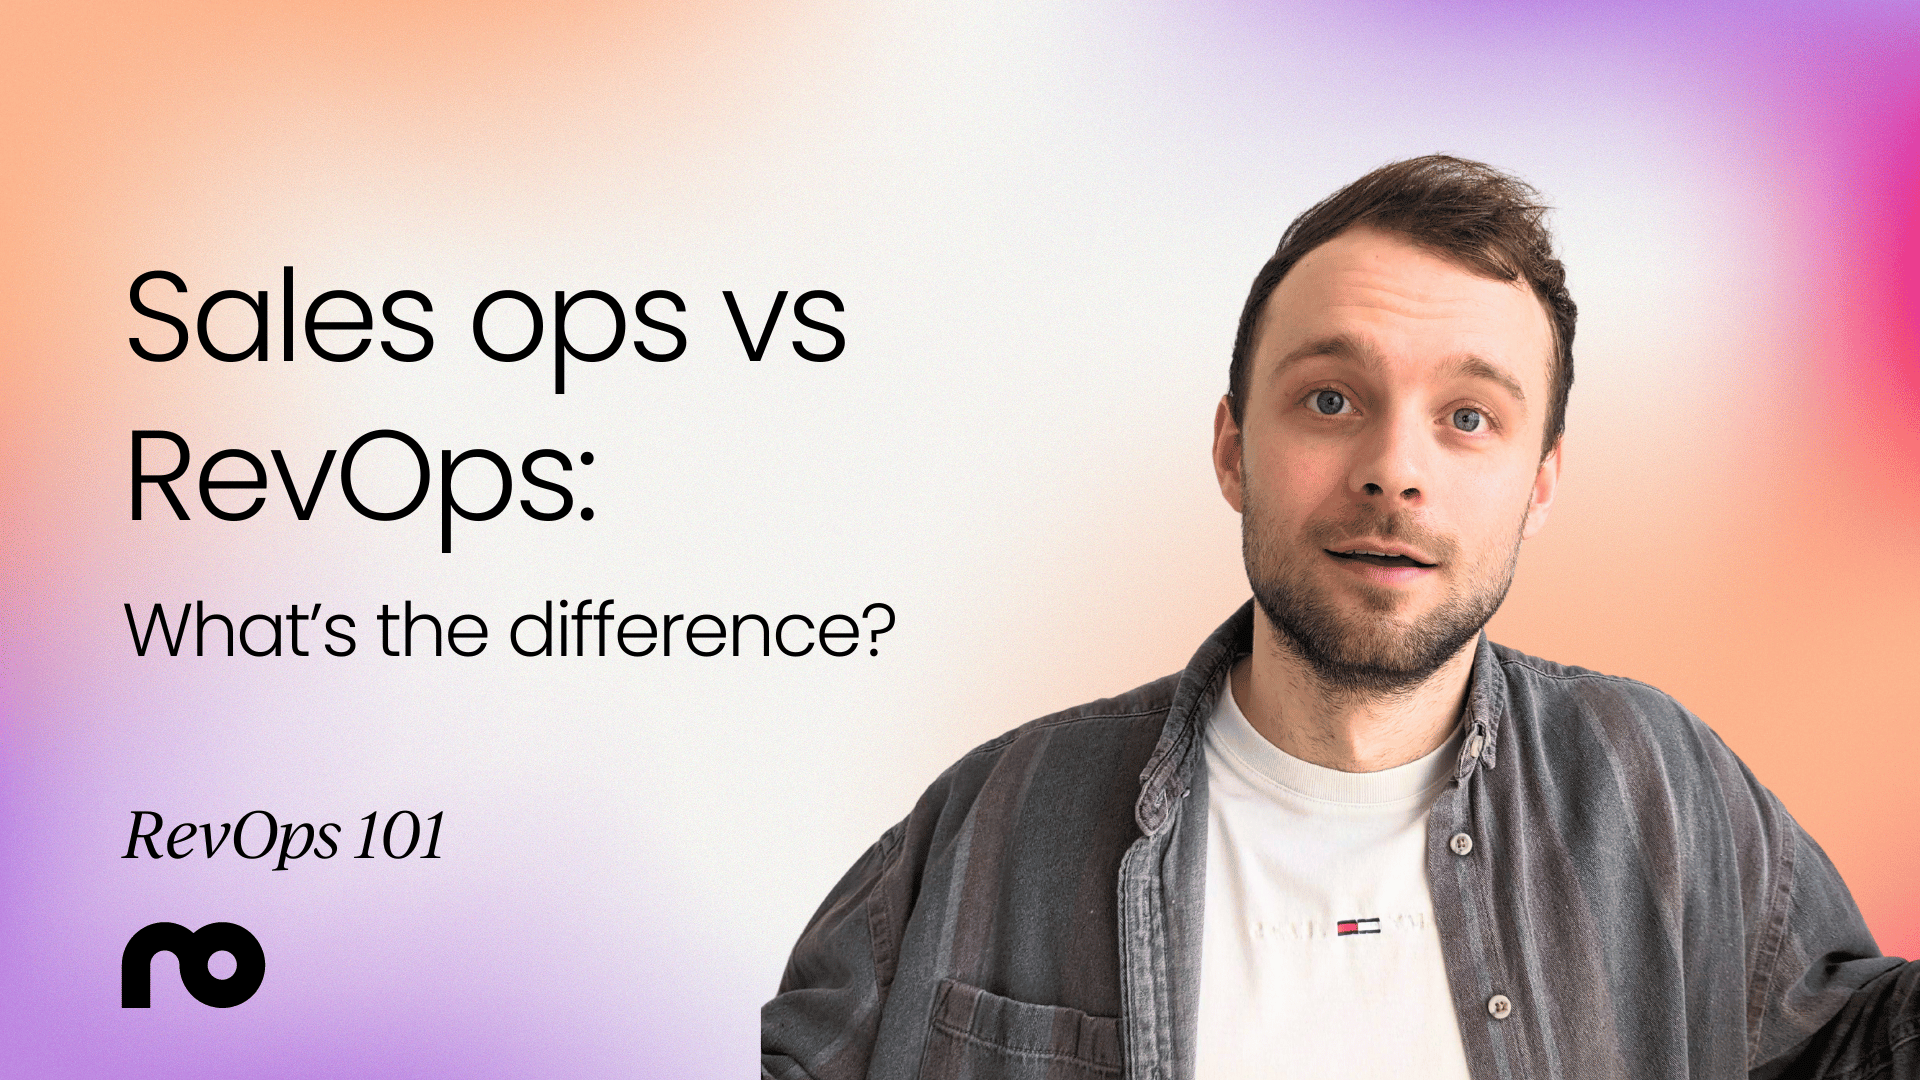 RevOps vs sales ops: What’s the difference?